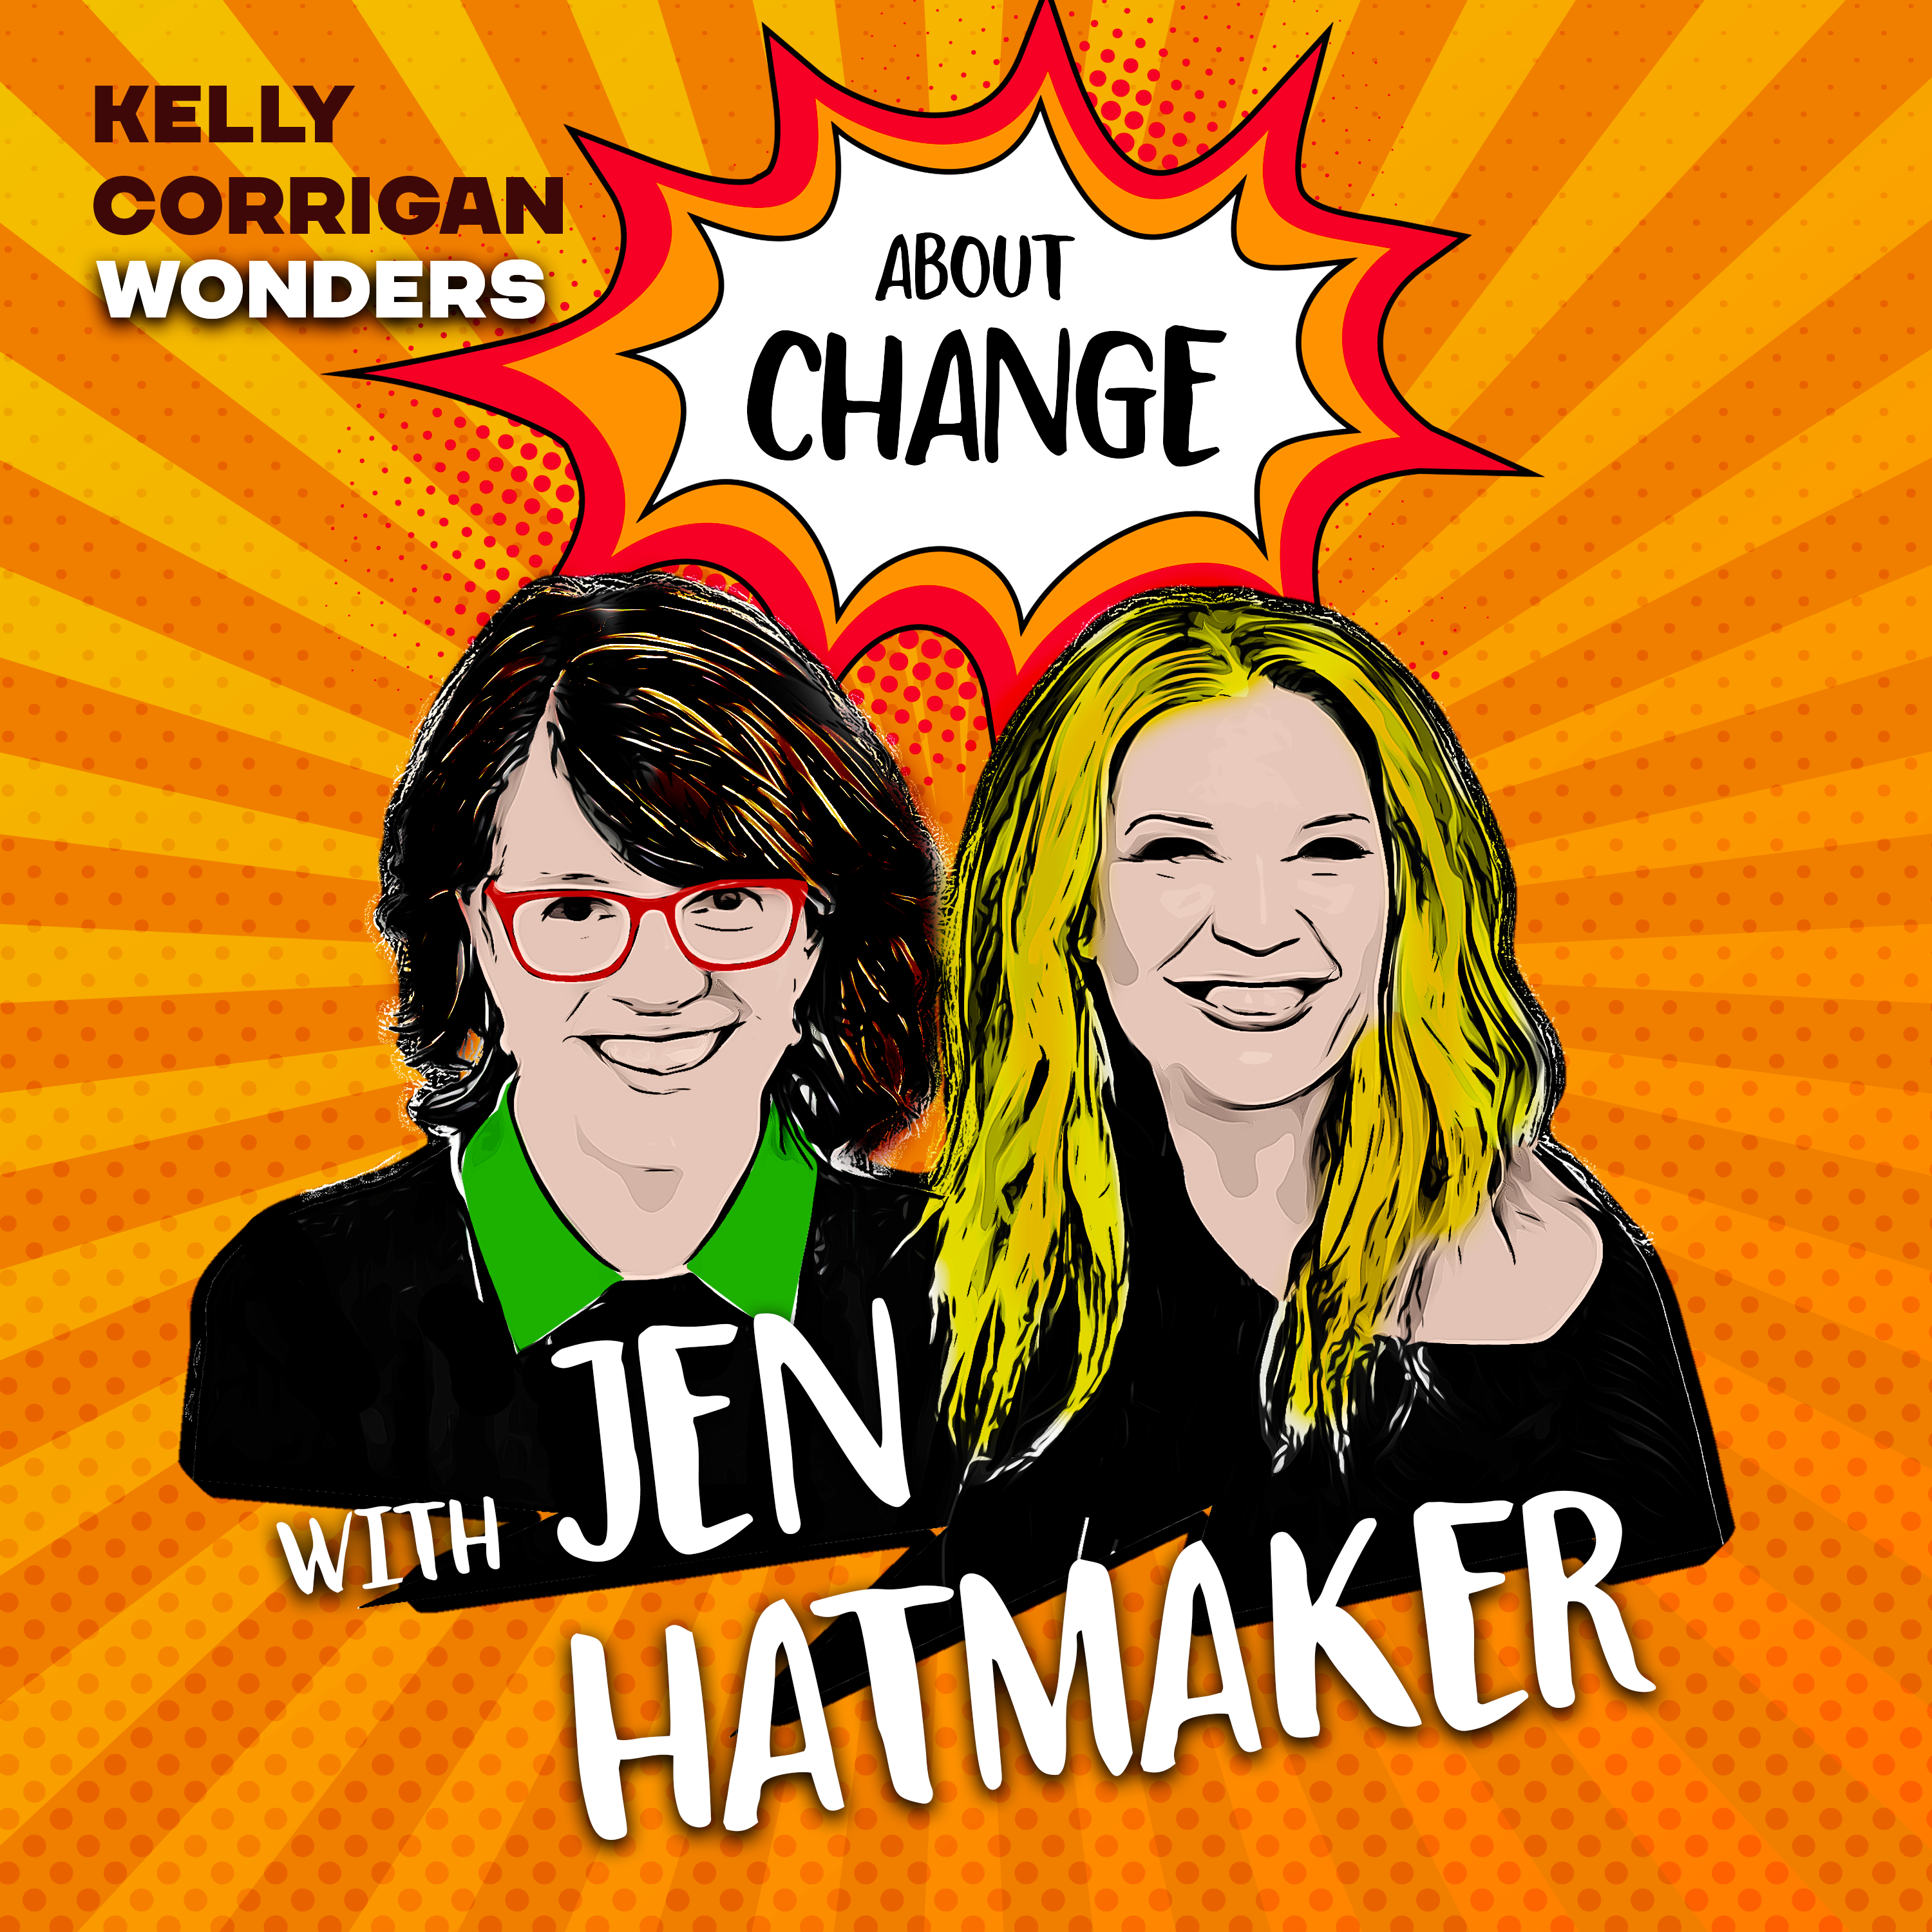 Readings and Conversation about How to Do Change Well with Jen Hatmaker